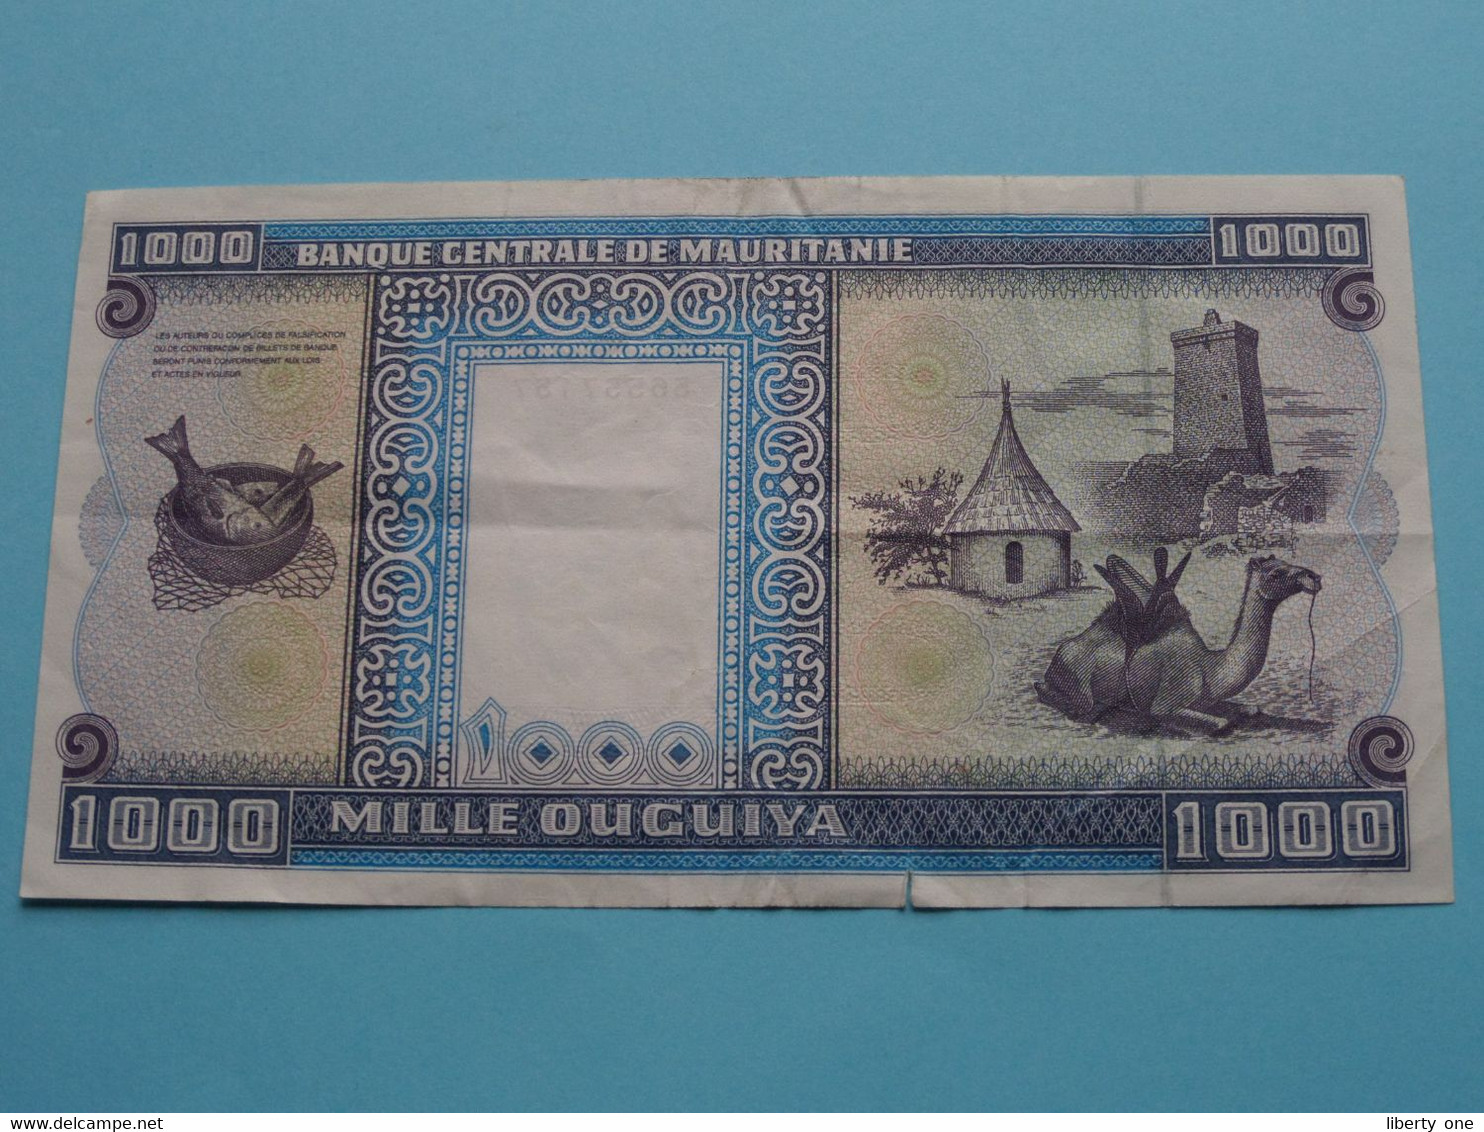 1000 Mille OUGUIYA - 28/11/1993 ( For Grade, Please See SCANS ) Circulated ( Small Tear ) ! - Mauritania